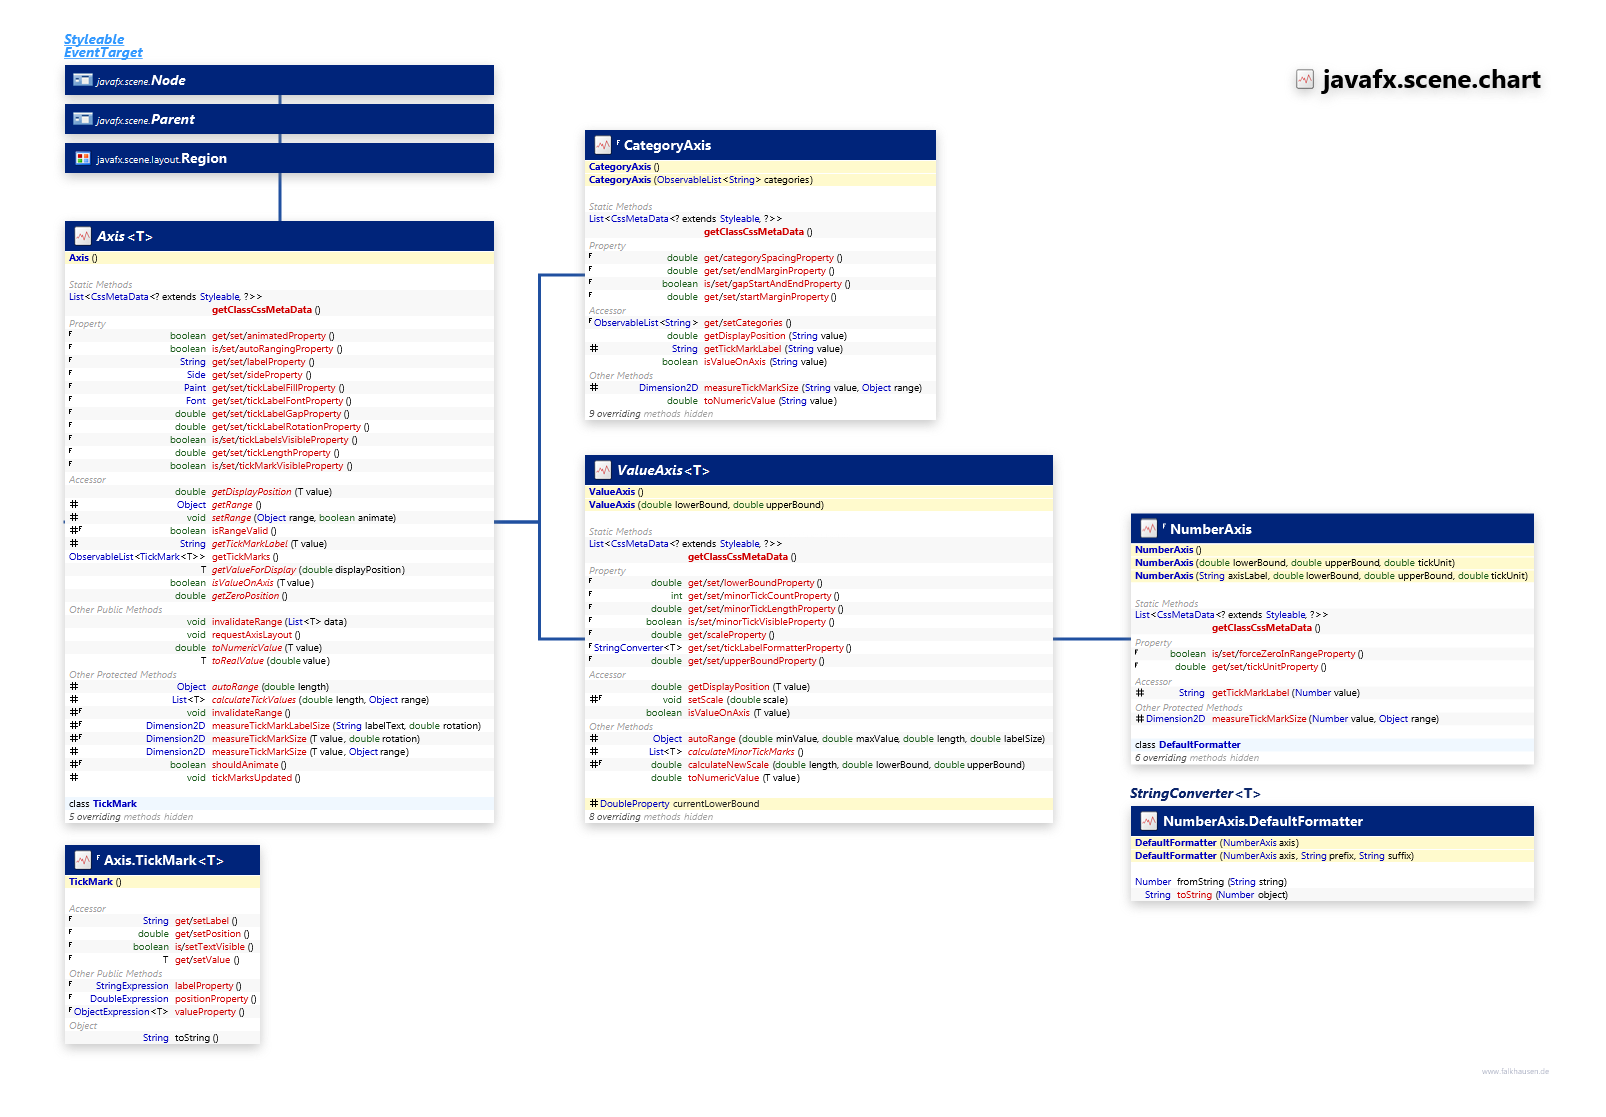 javafx.scene.chart Axis class diagram and api documentation for JavaFX 8